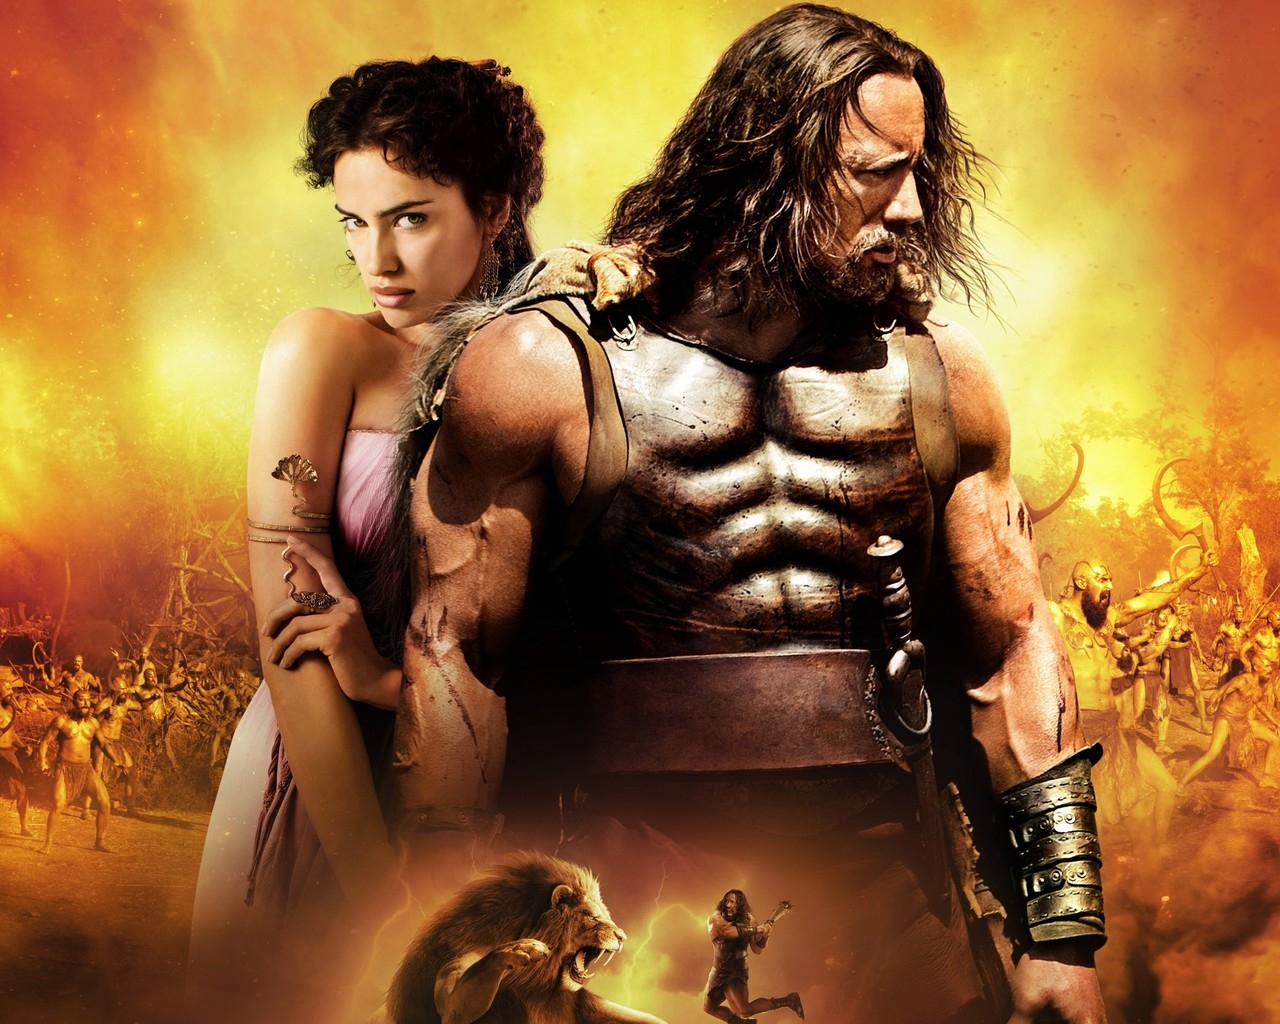 Hercules 2014 Movie Poster for 1280 x 1024 resolution